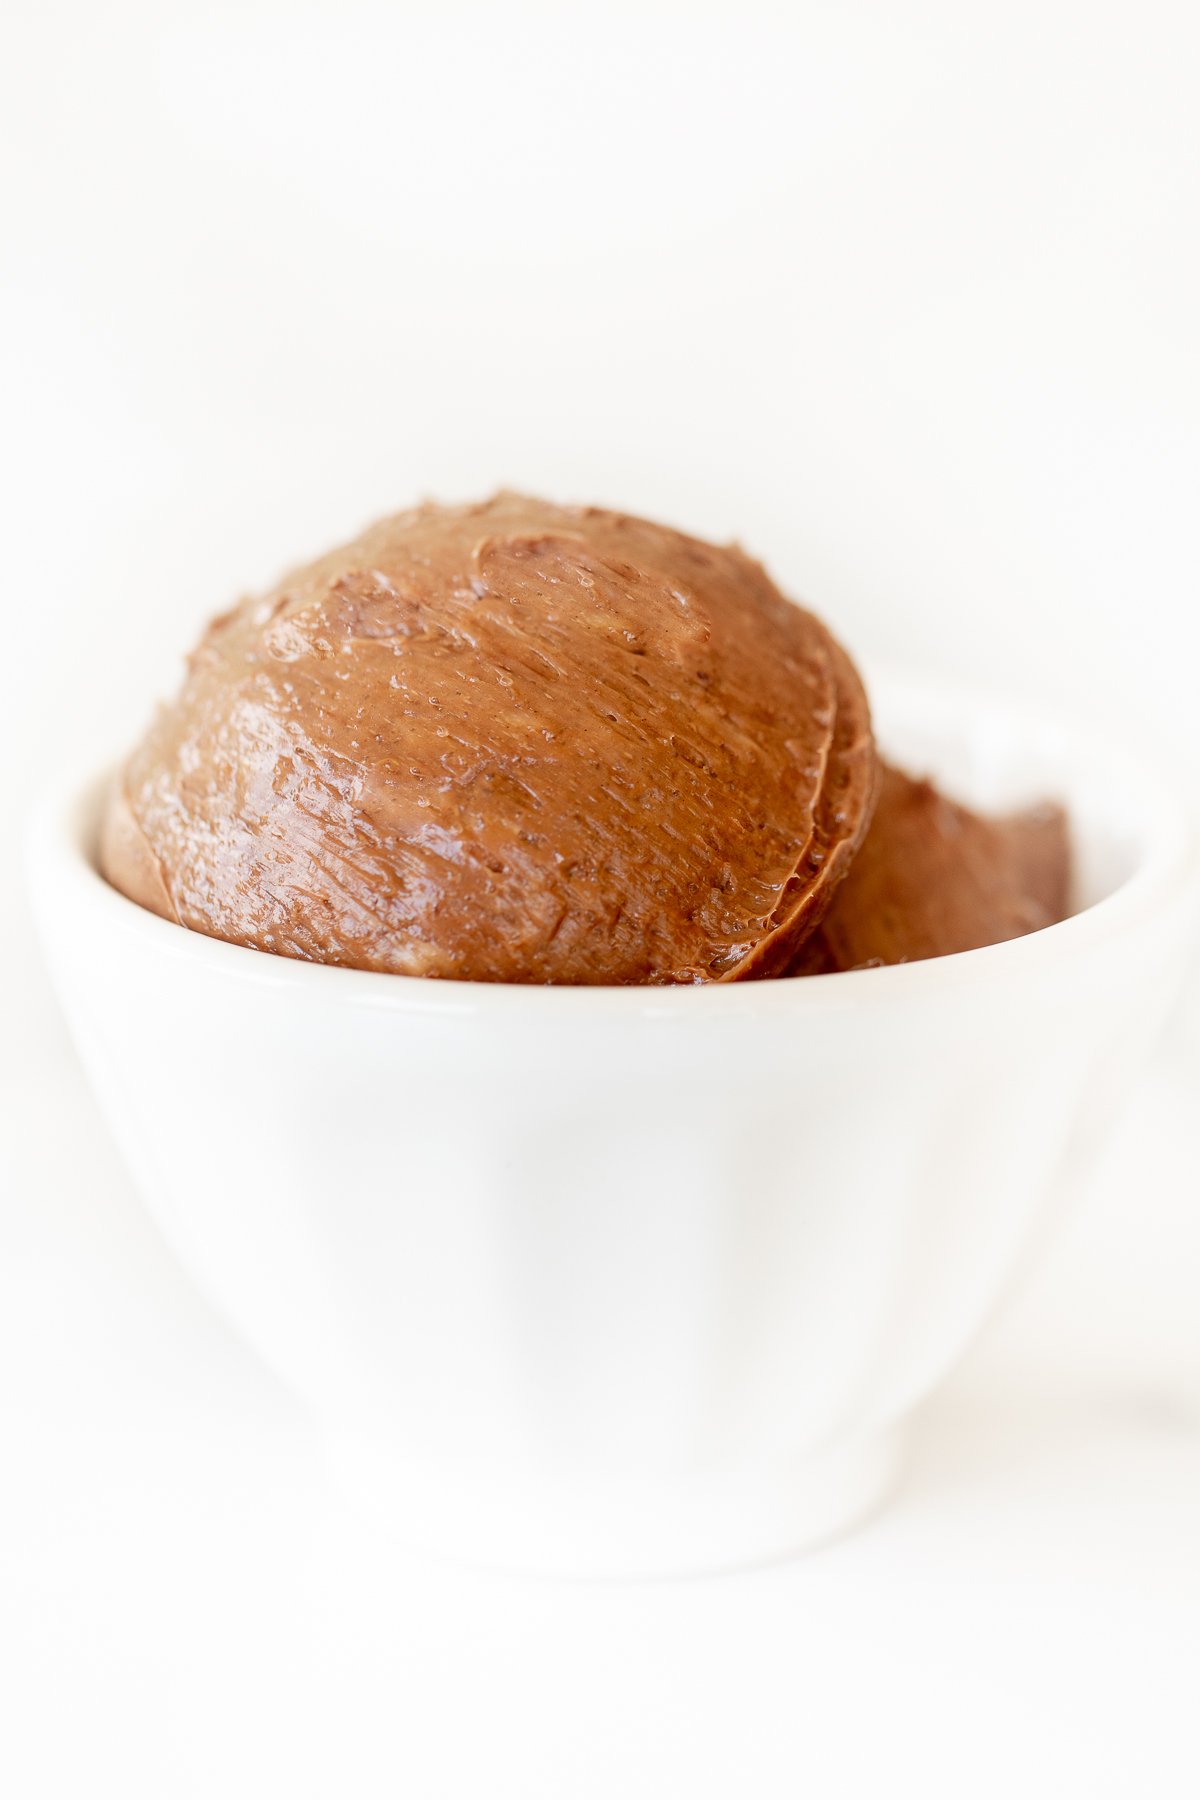 A small white bowl full of chocolate butter, on a marble surface.